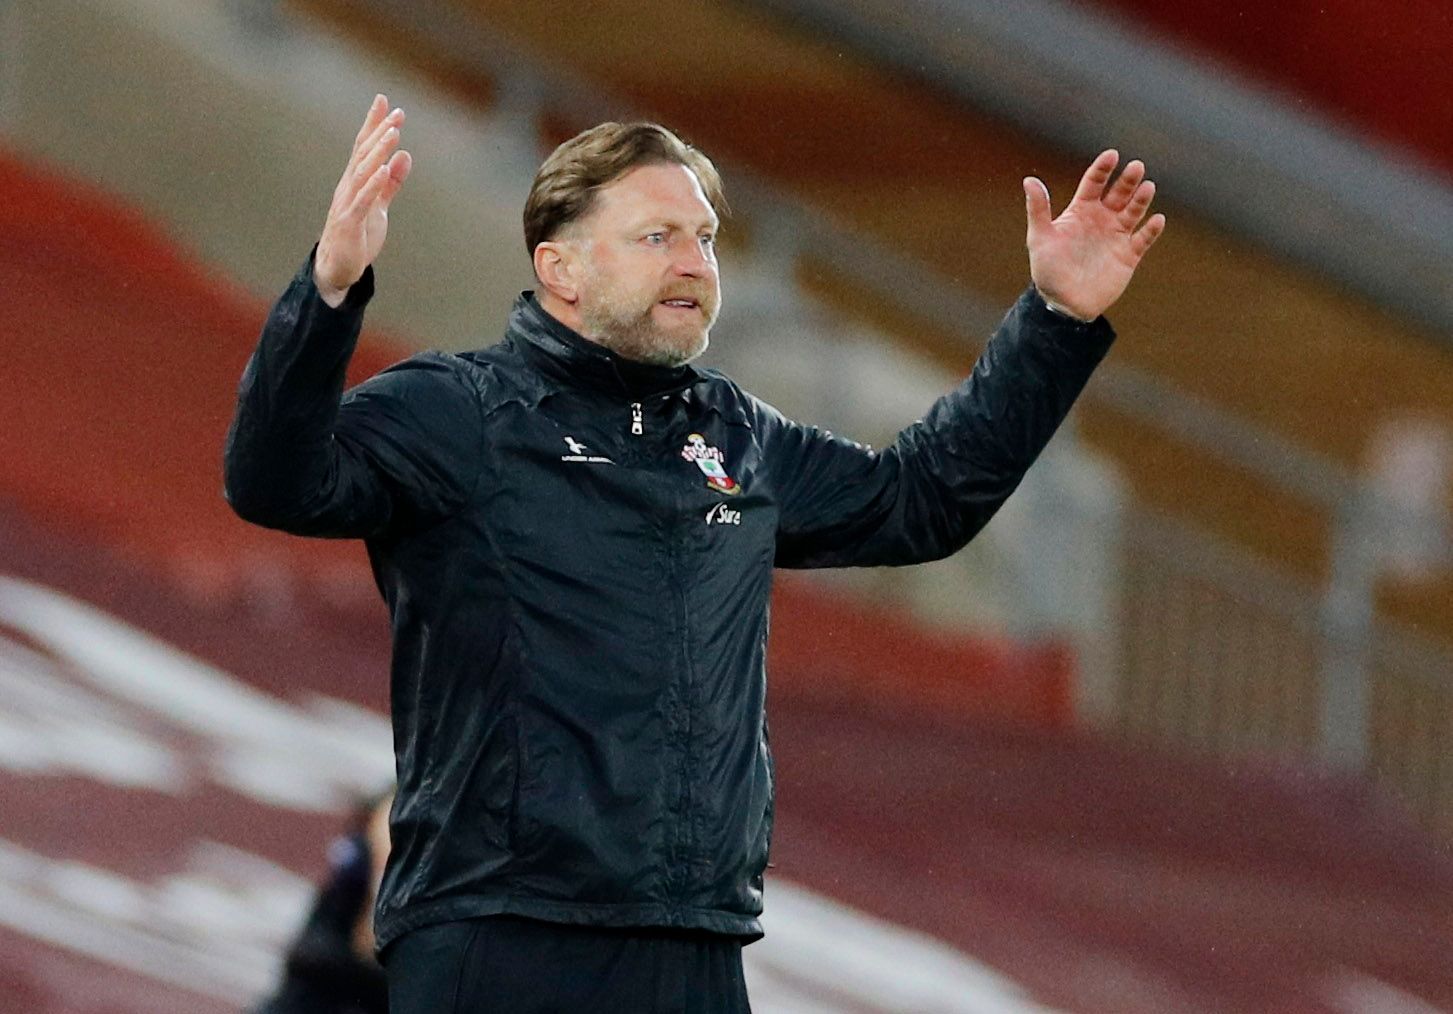 Soccer Football - Premier League - Liverpool v Southampton - Anfield, Liverpool, Britain - May 8, 2021 Southampton manager Ralph Hasenhuttl reacts Pool via REUTERS/Phil Noble EDITORIAL USE ONLY. No use with unauthorized audio, video, data, fixture lists, club/league logos or 'live' services. Online in-match use limited to 75 images, no video emulation. No use in betting, games or single club /league/player publications.  Please contact your account representative for further details.